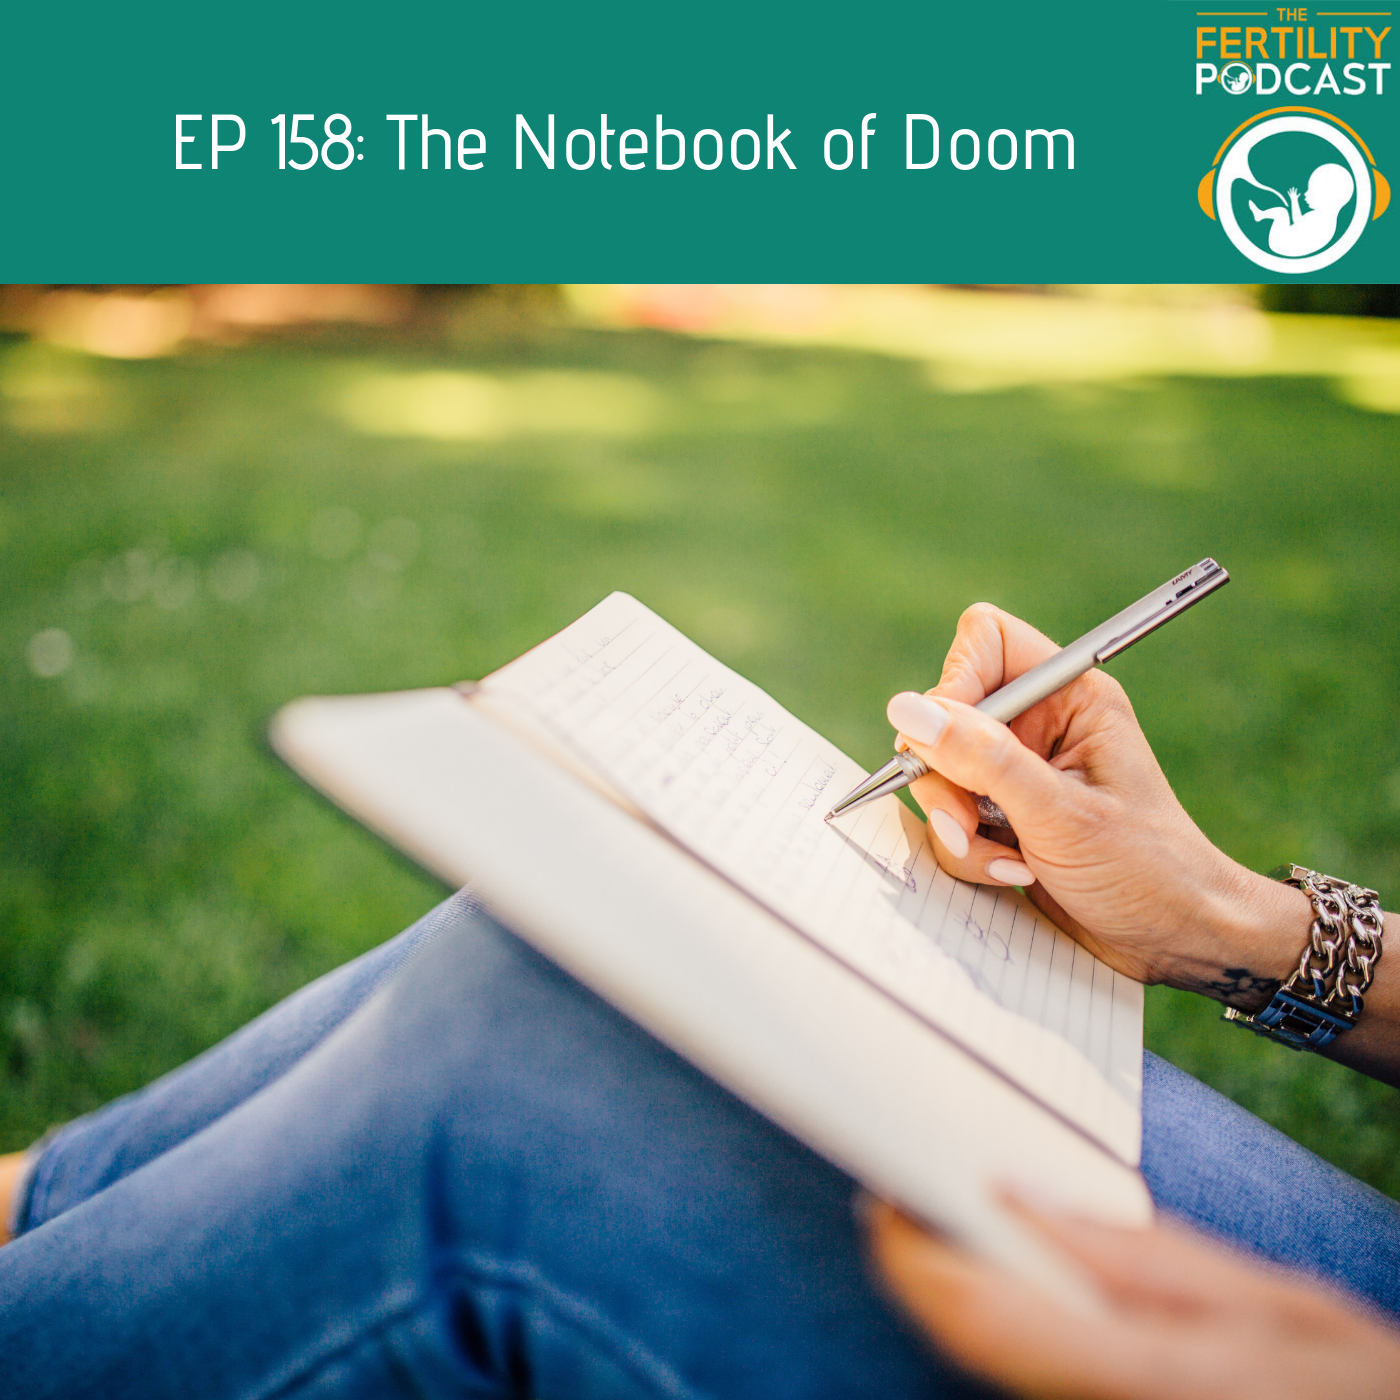 Why a notebook is essential when going through fertility treatment – Katy Linderman explains